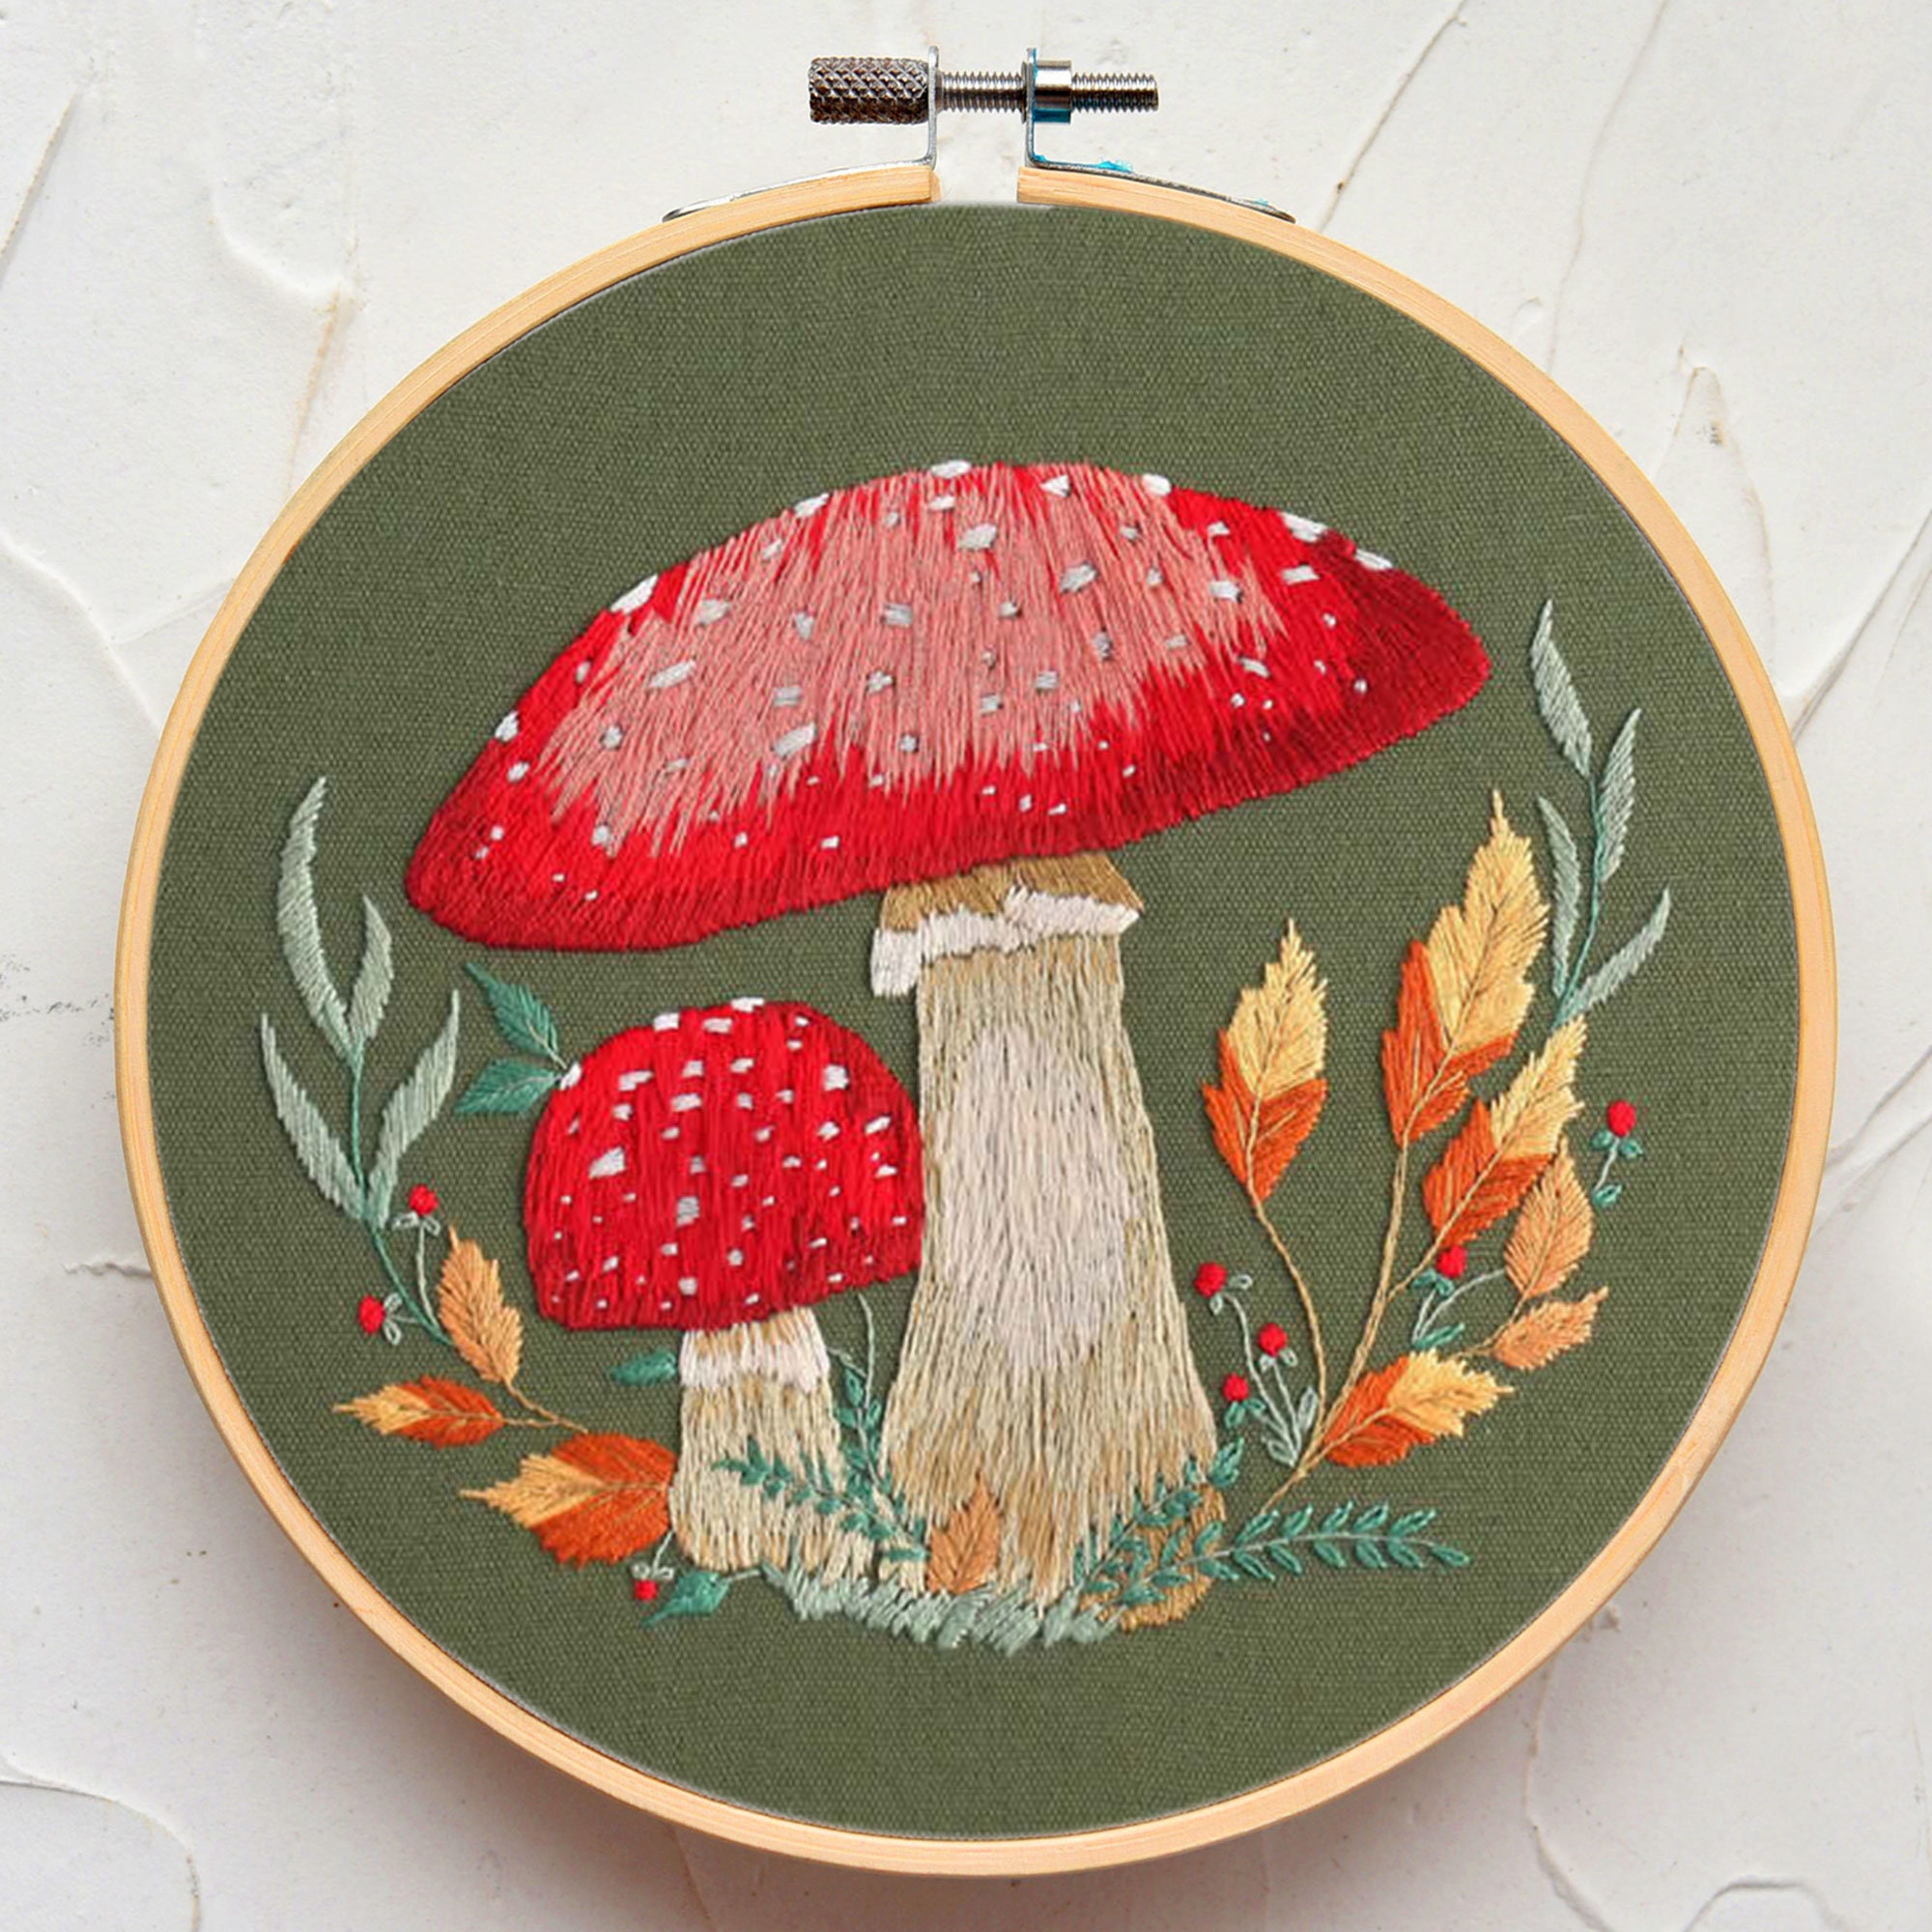 Forest Mushrooms Embroidery Kit  Embroidery kits, Hand embroidery kits,  Embroidery